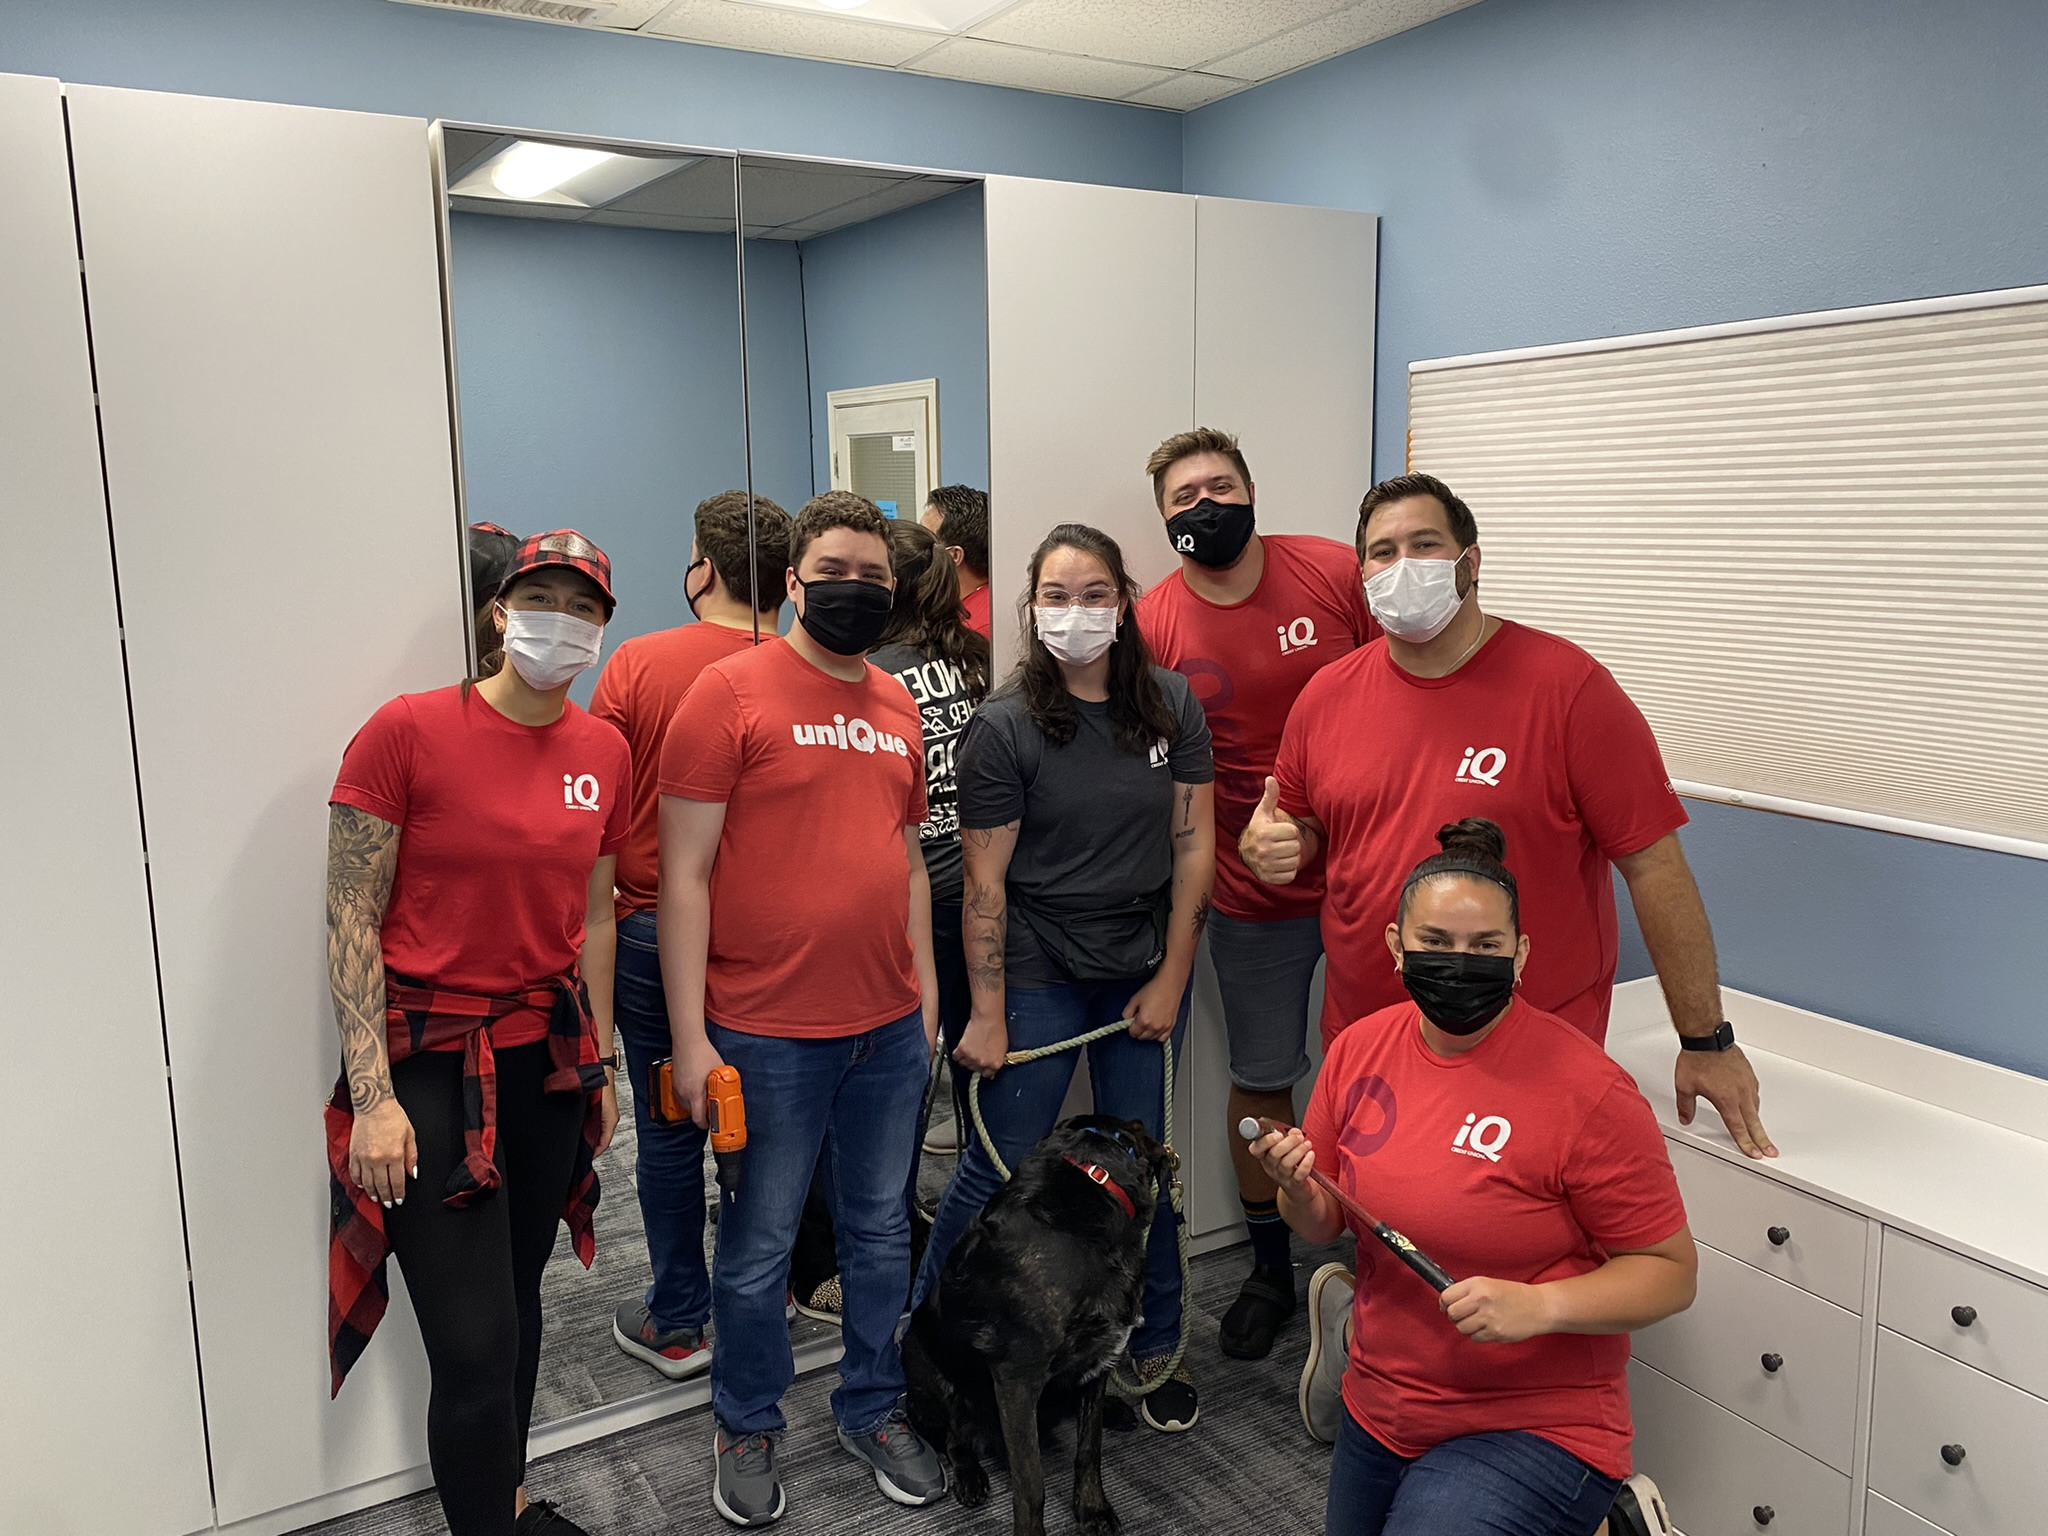 Six people in front of a tall white closet. Full-length mirrors are on the middle doors. They are all wearing masks, t-shirts, and either jeans or jean shorts. One person holds a medium-sized black dog on a leash. A person kneeling on the right side of the group holds a hammer.